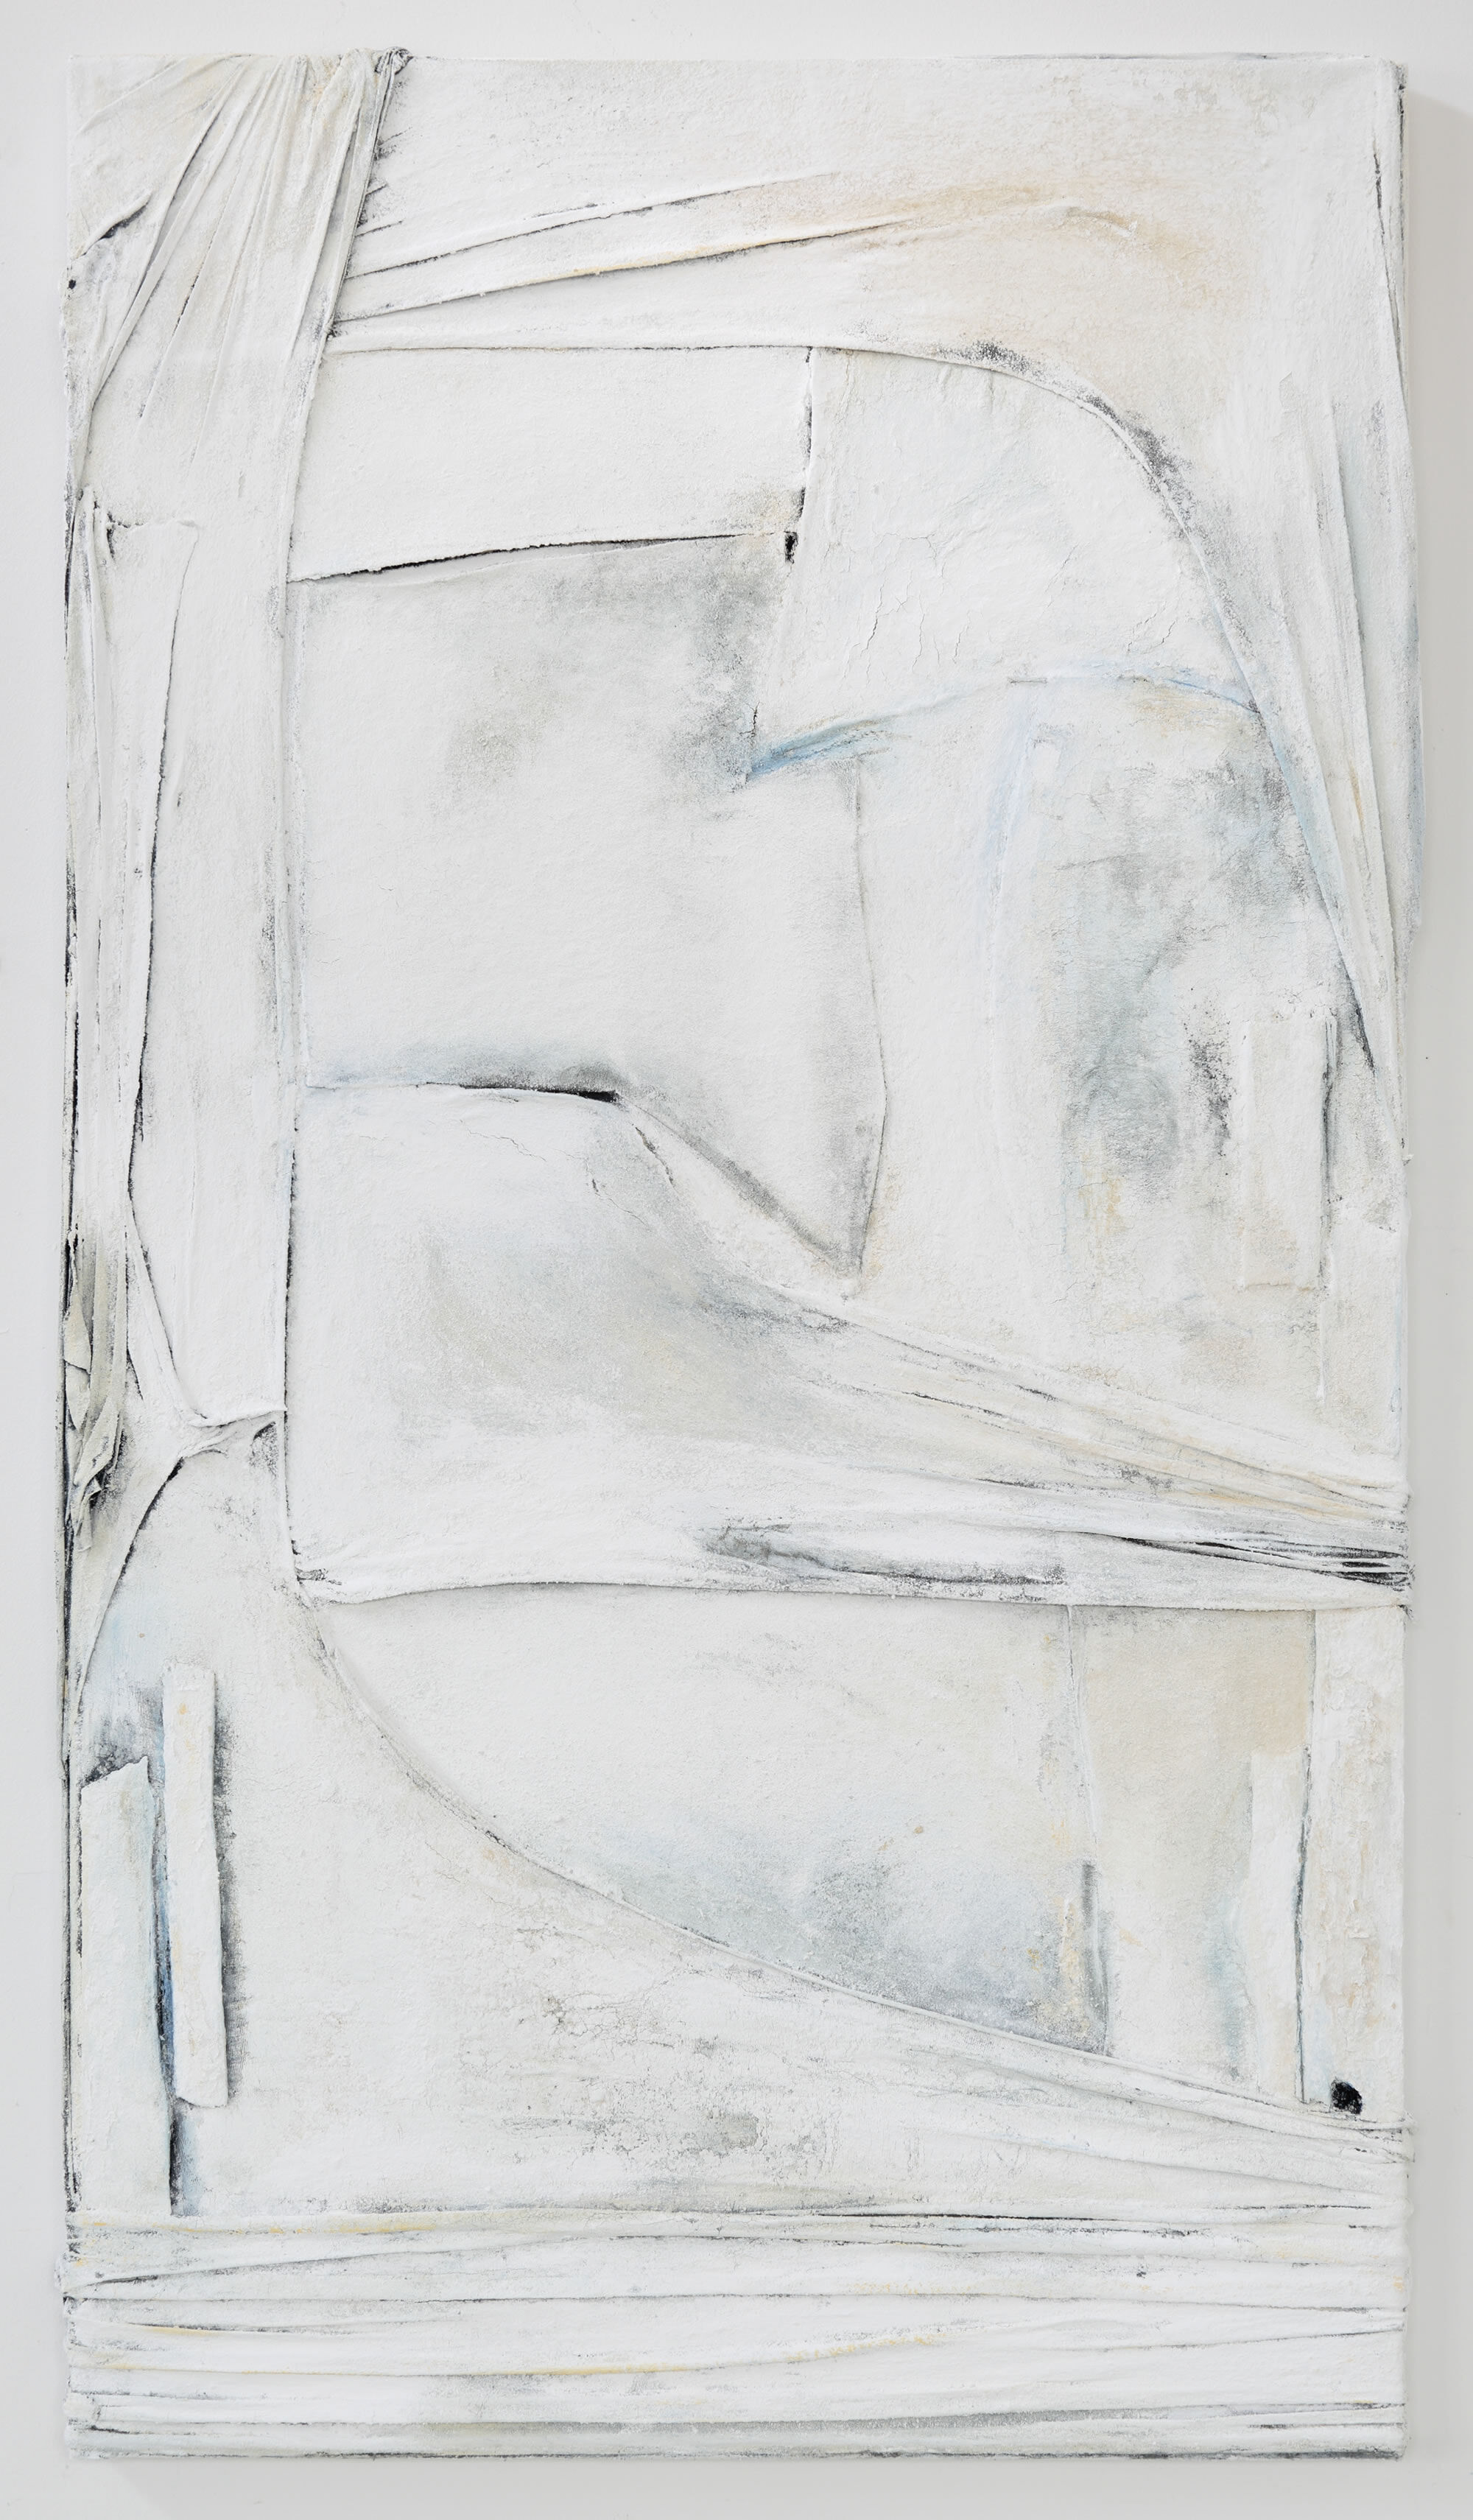 4.Anna Caione White On White II, 2018, fabric, pigment _ mixed media on canvas, 92cm x 51cm